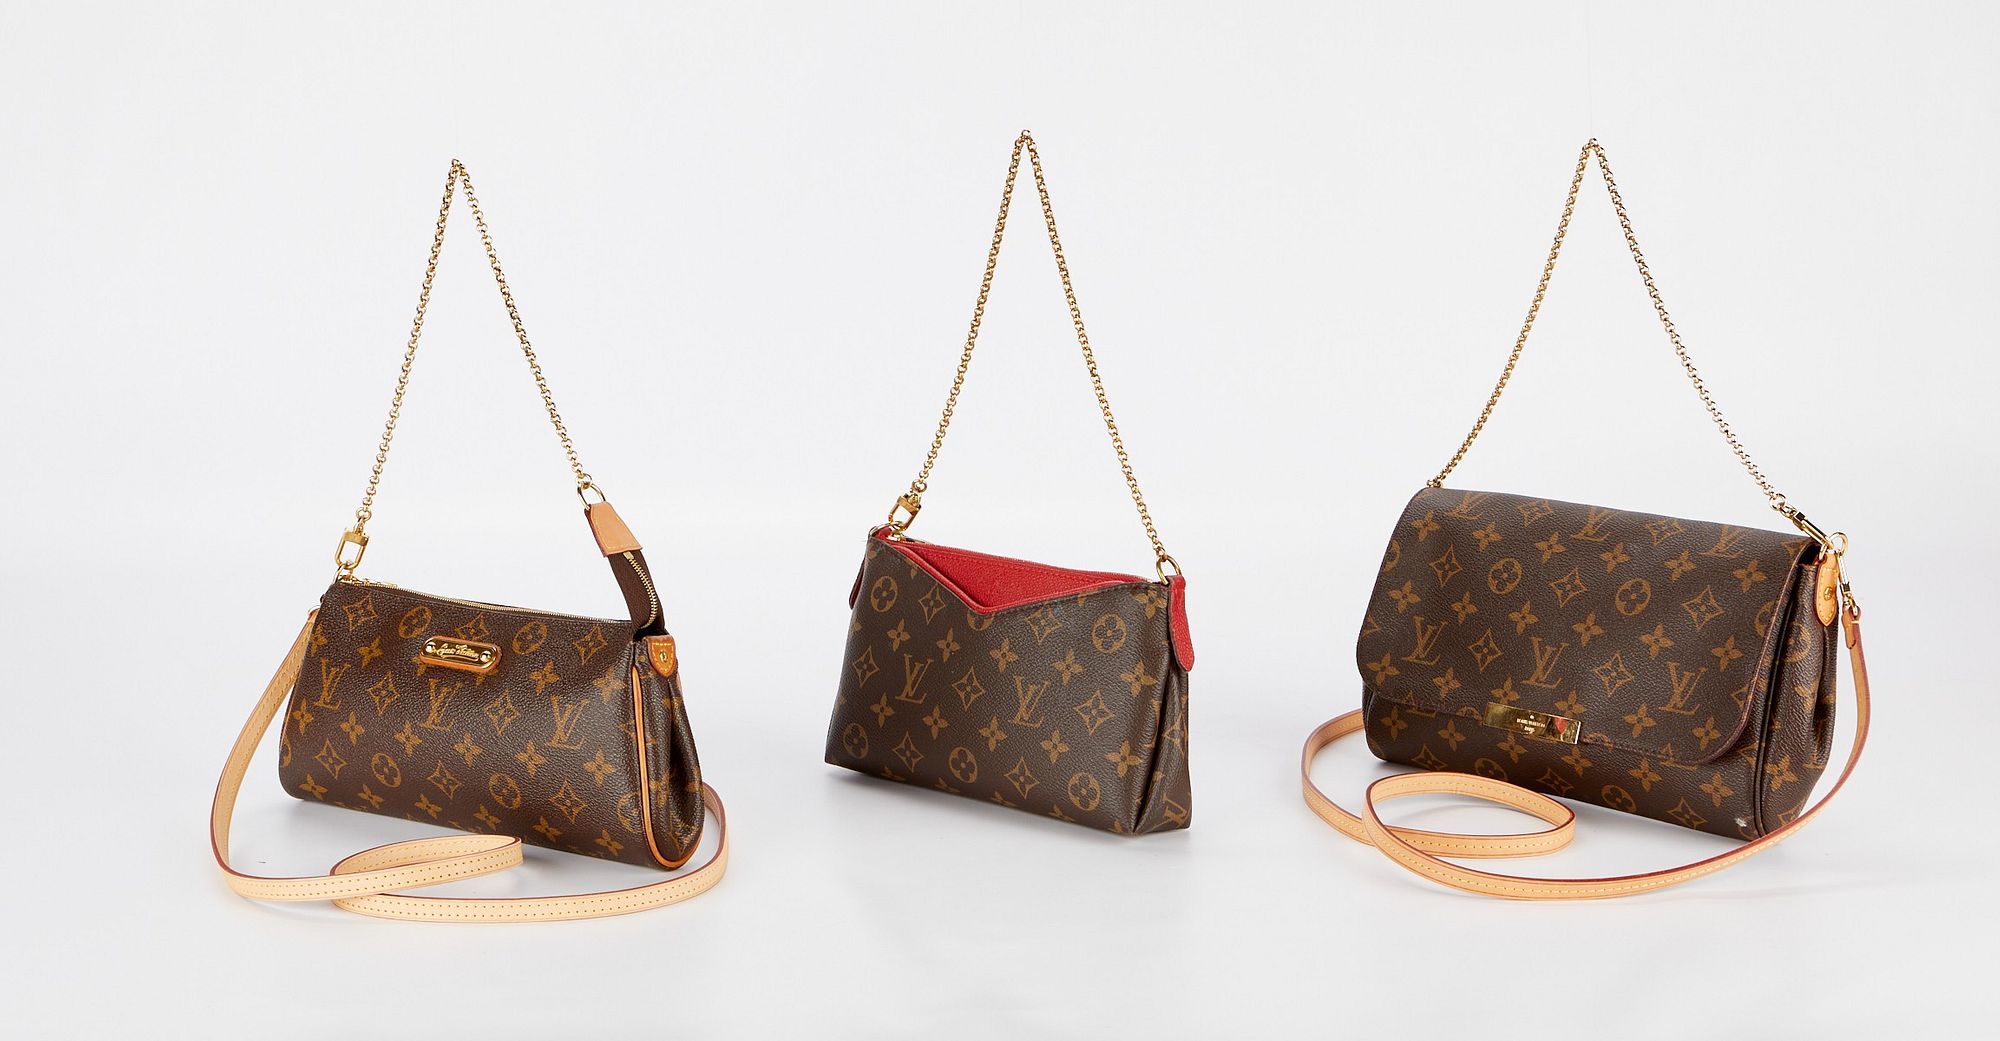 Group of 3 Louis Vuitton Clutches sold at auction on 16th May